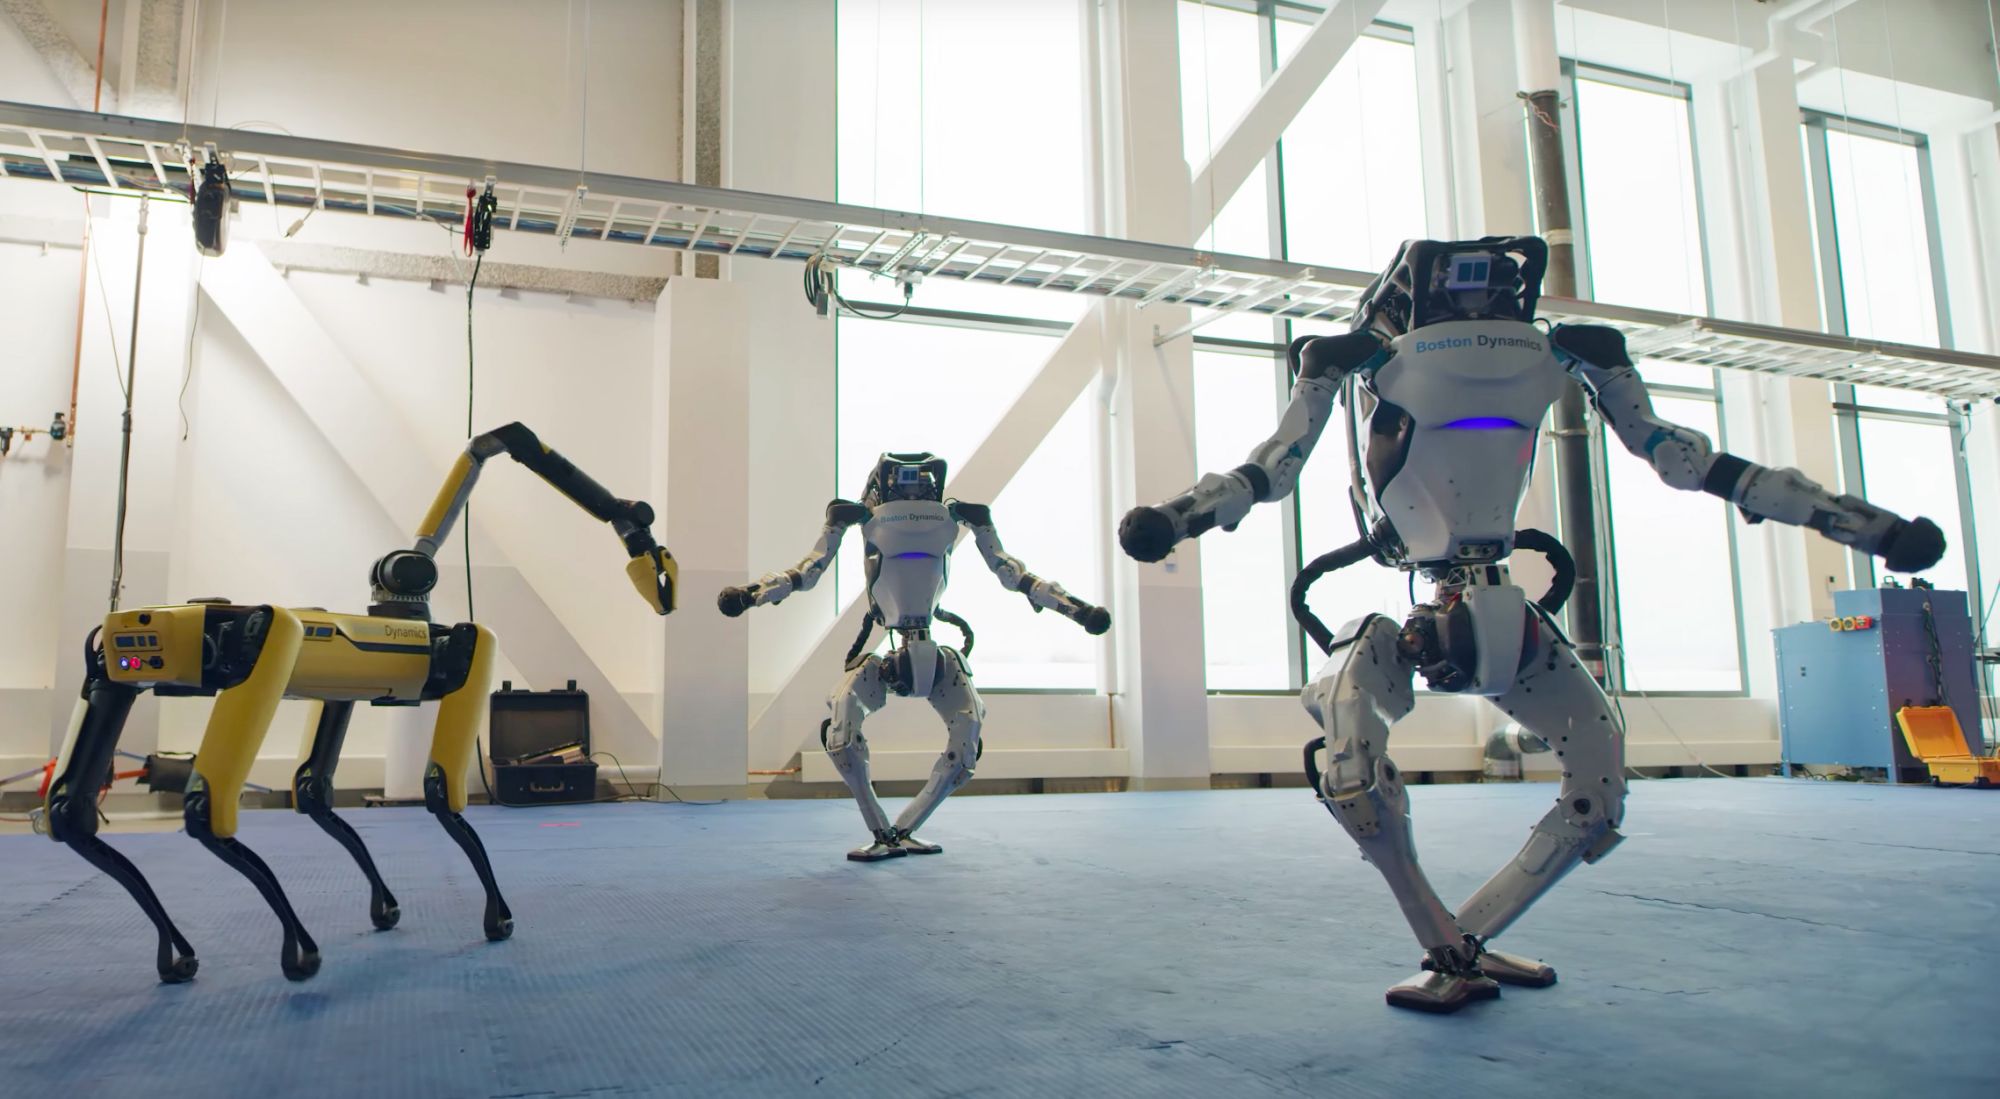 Boston Dynamics, ANYbotics, Agility Robotics and other companies promise not to equip their robots with weapons